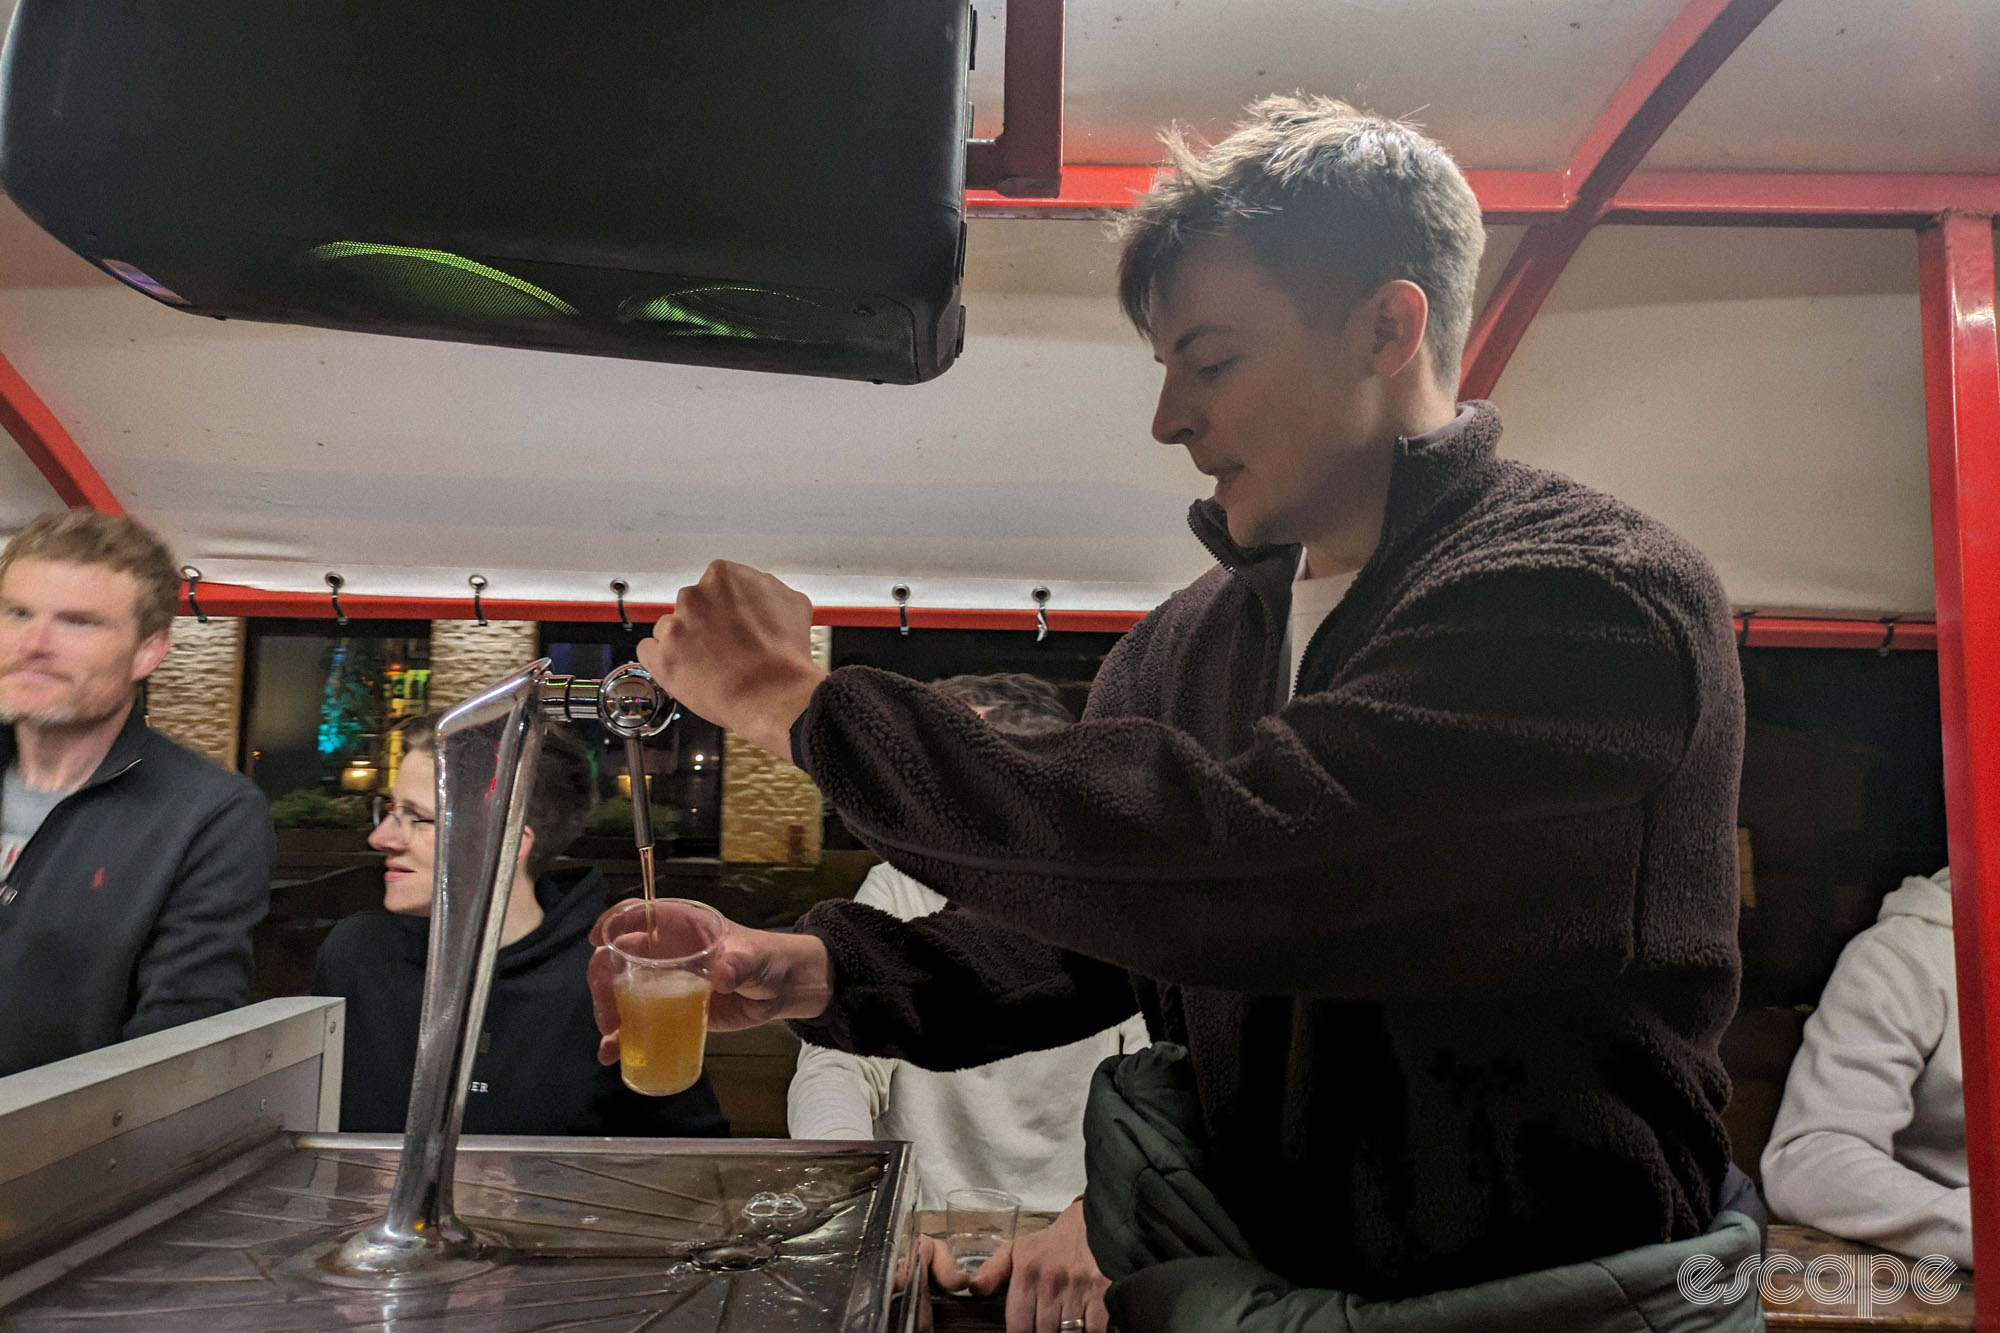 Jonny pouring beers into little plastic cups, with a very serious expression.